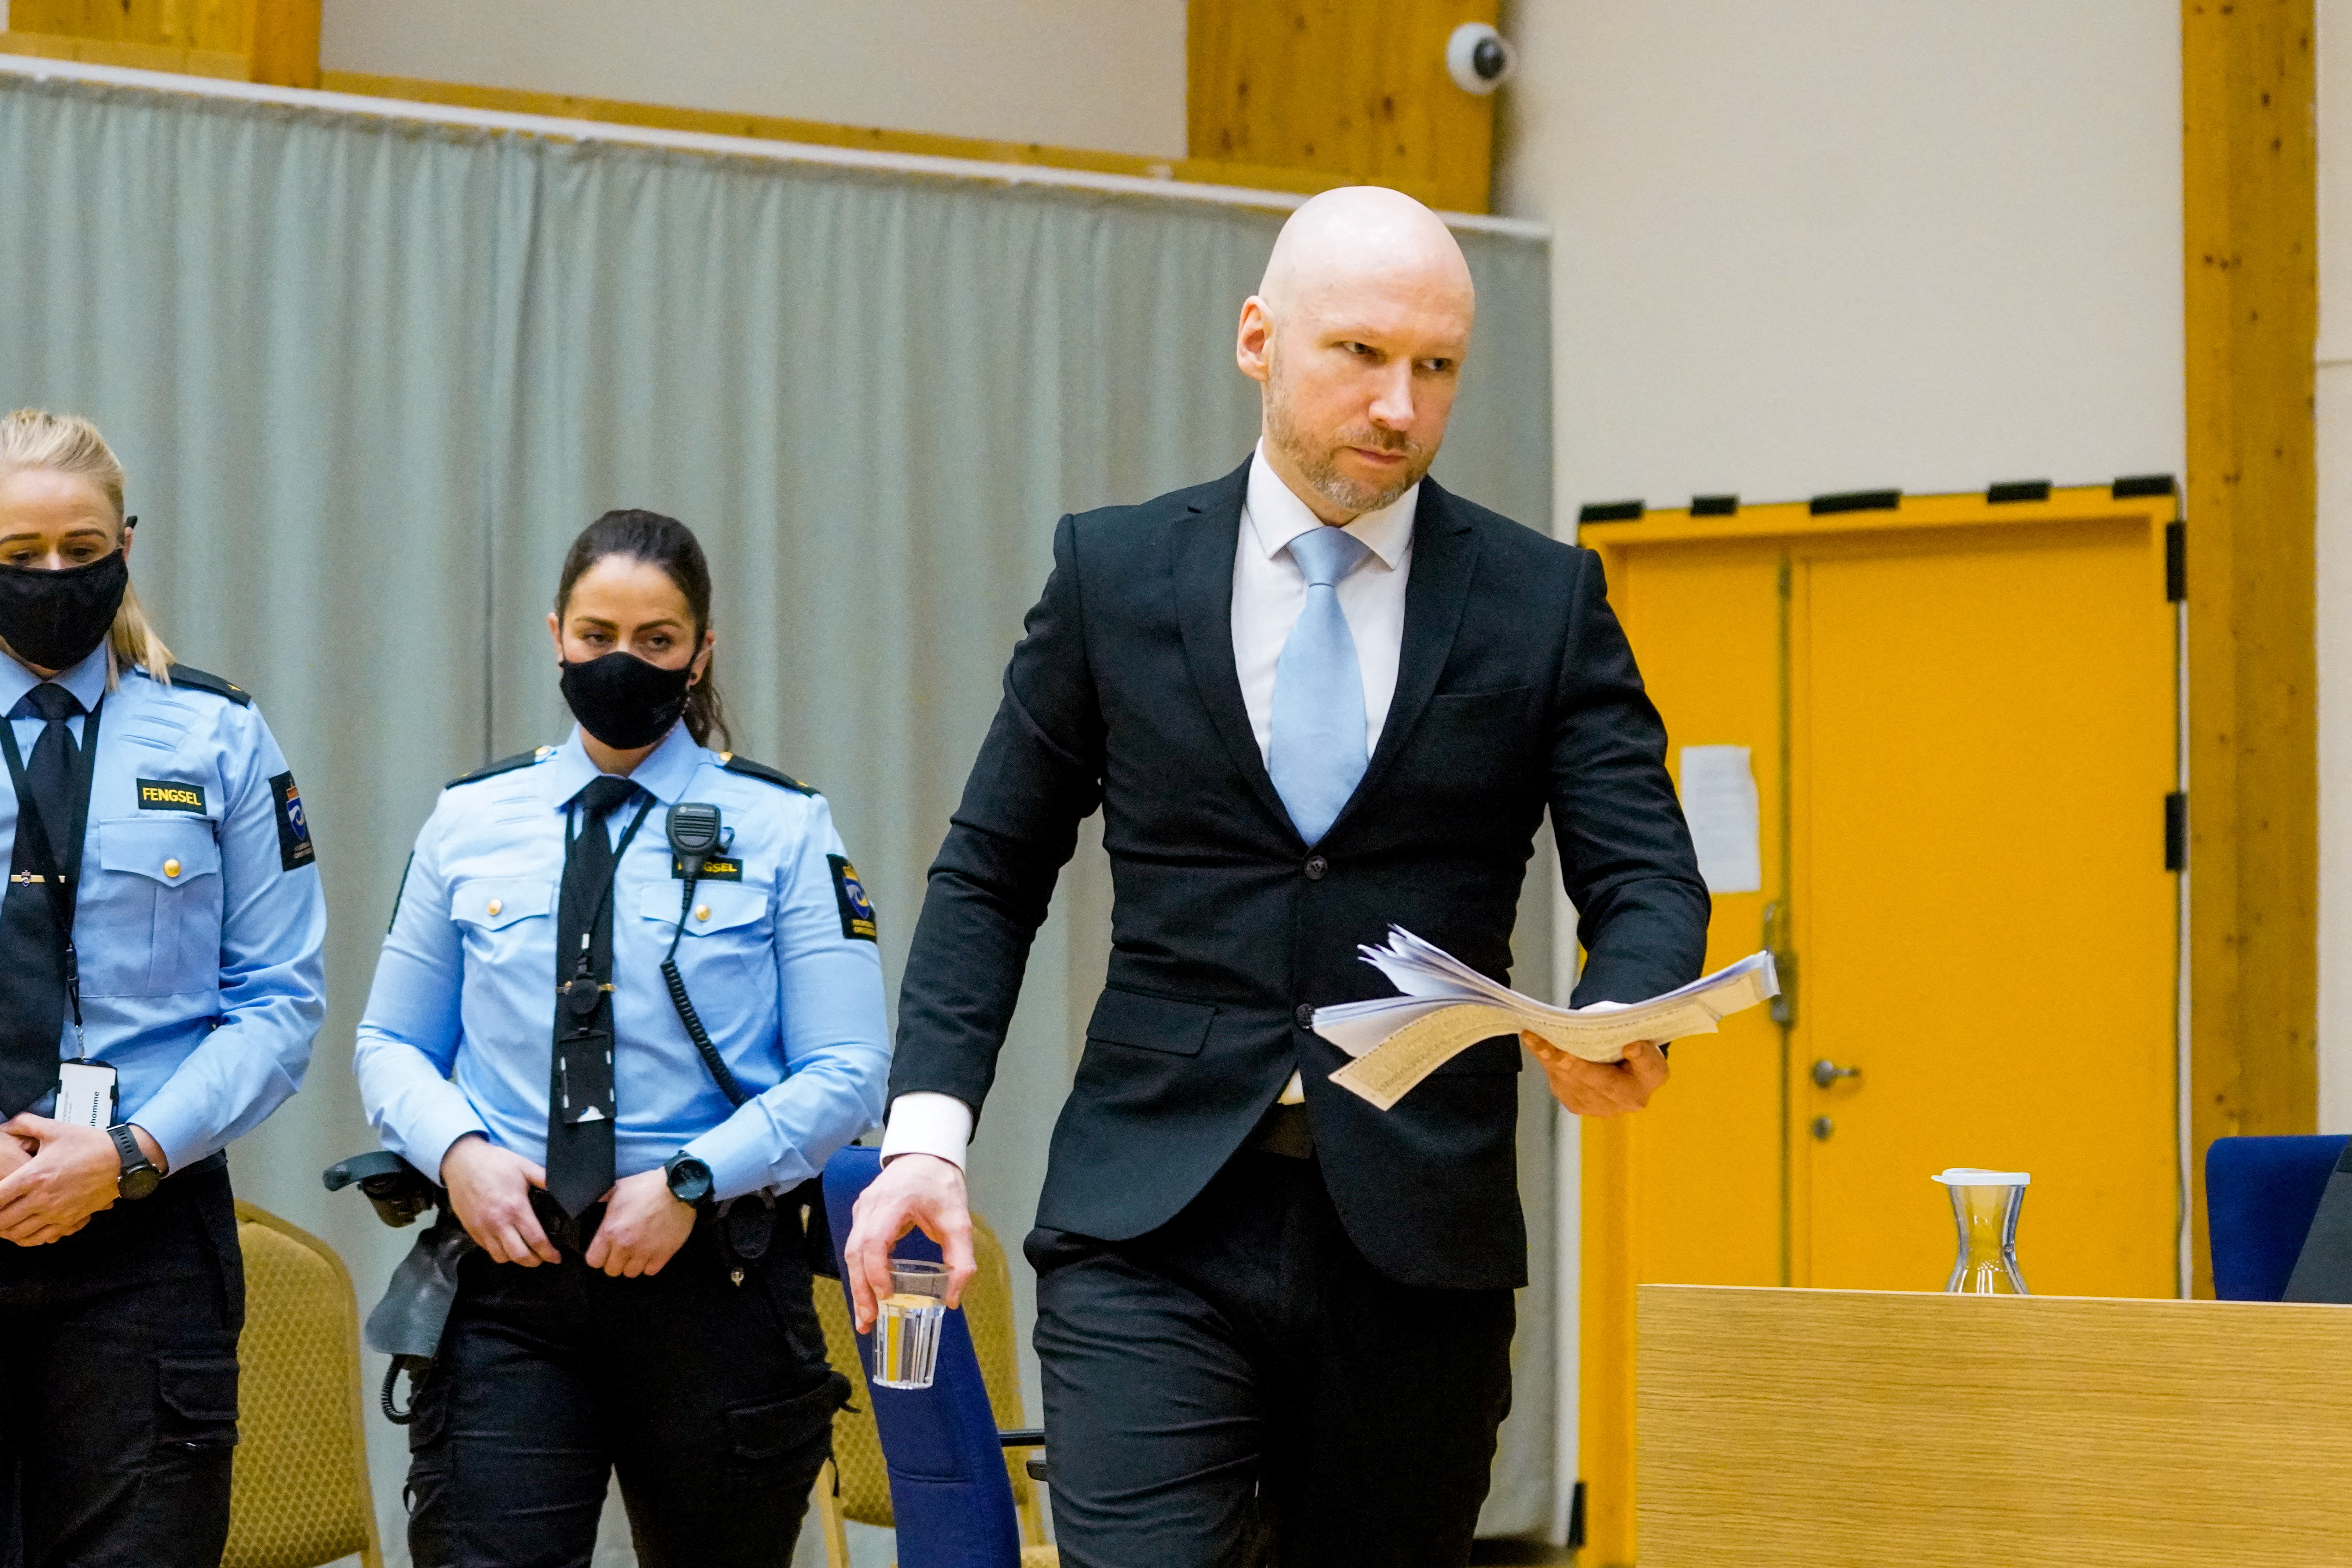 Court hearing for mass killer Anders Behring Breivik's parole request